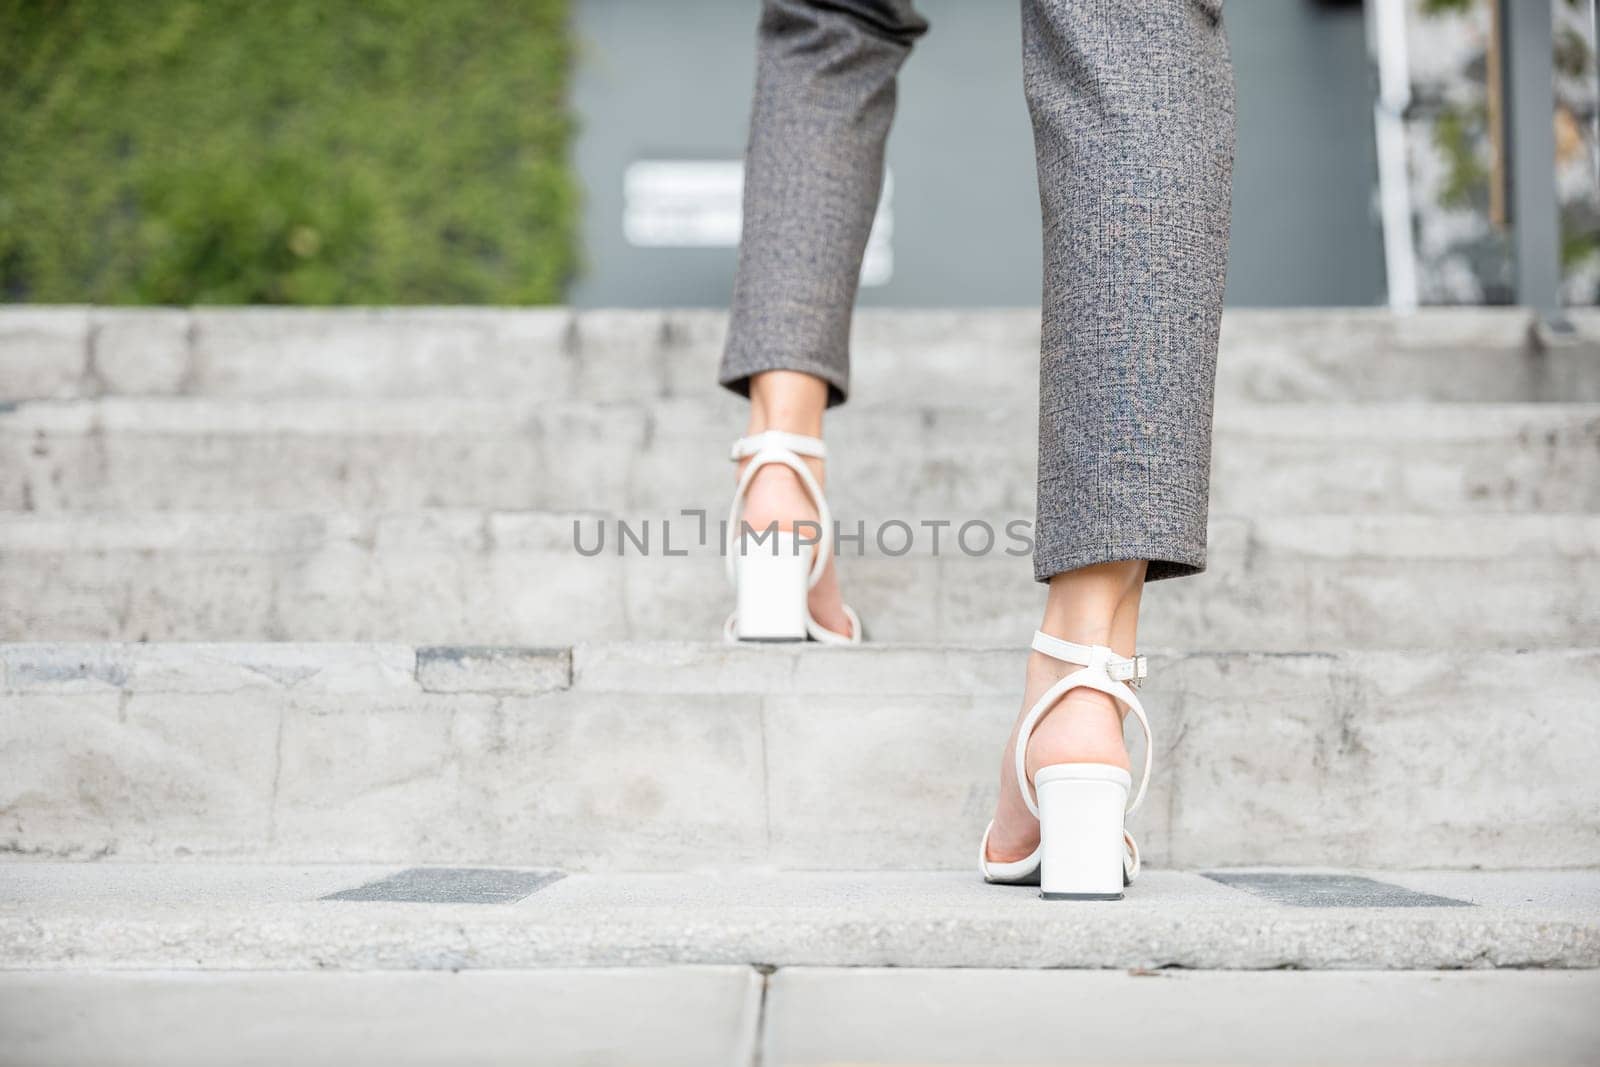 In bustling city a determined businesswoman legs in motion are captured on office stairway. Her black shoe signifies constant pursuit of success, progress, and achievement in dynamic business setting. by Sorapop